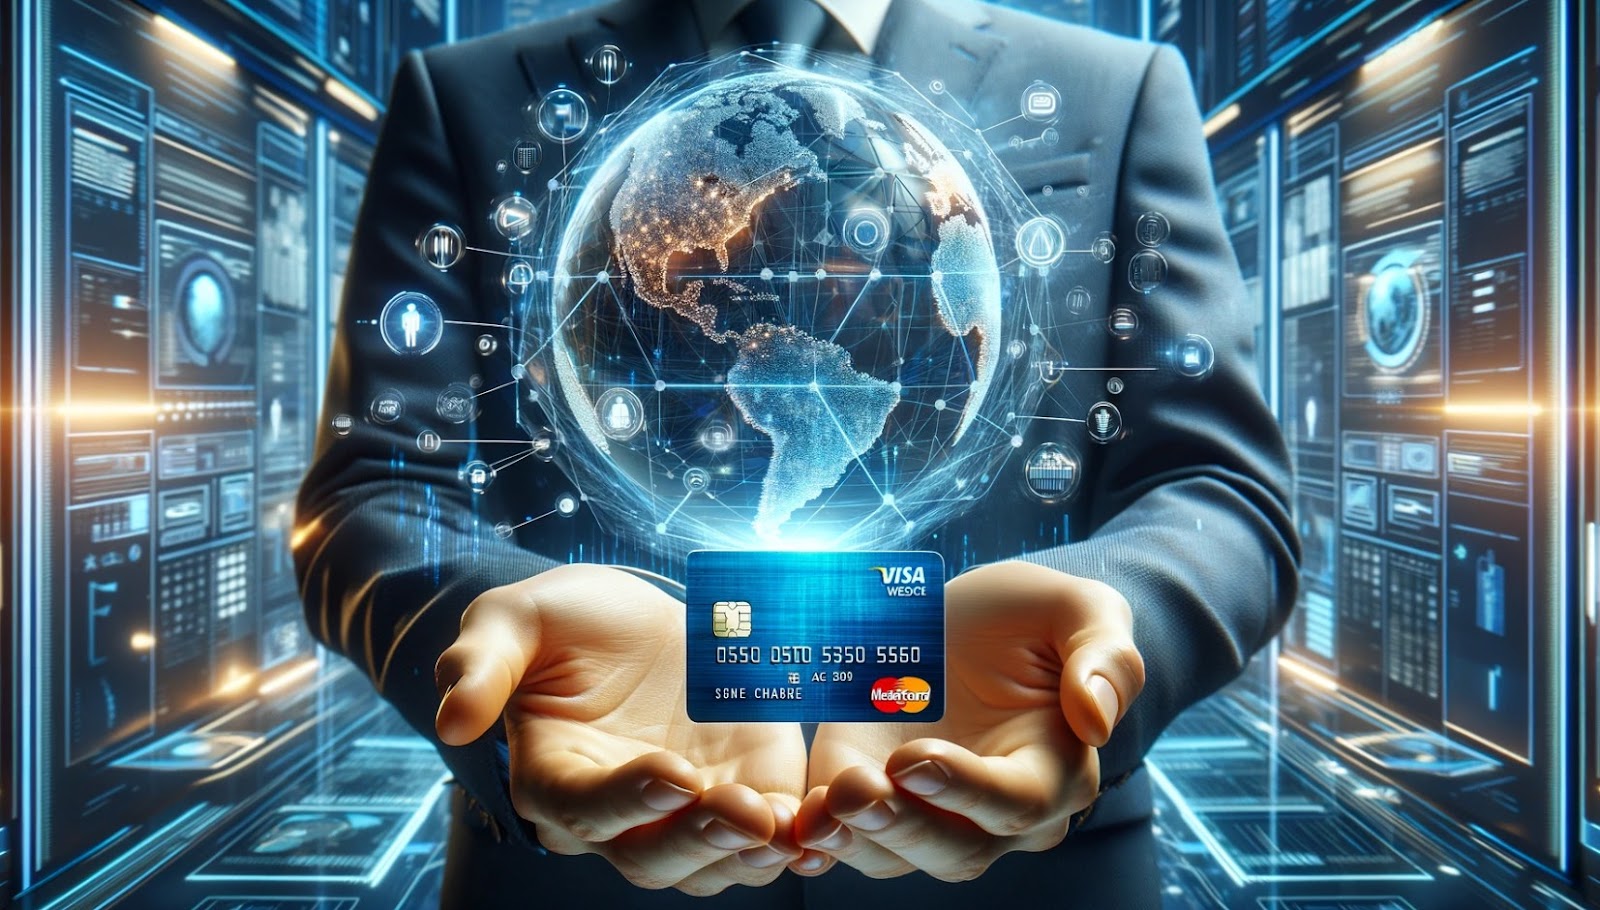 How to create a virtual Visa/MasterCard for online shopping without spending limits